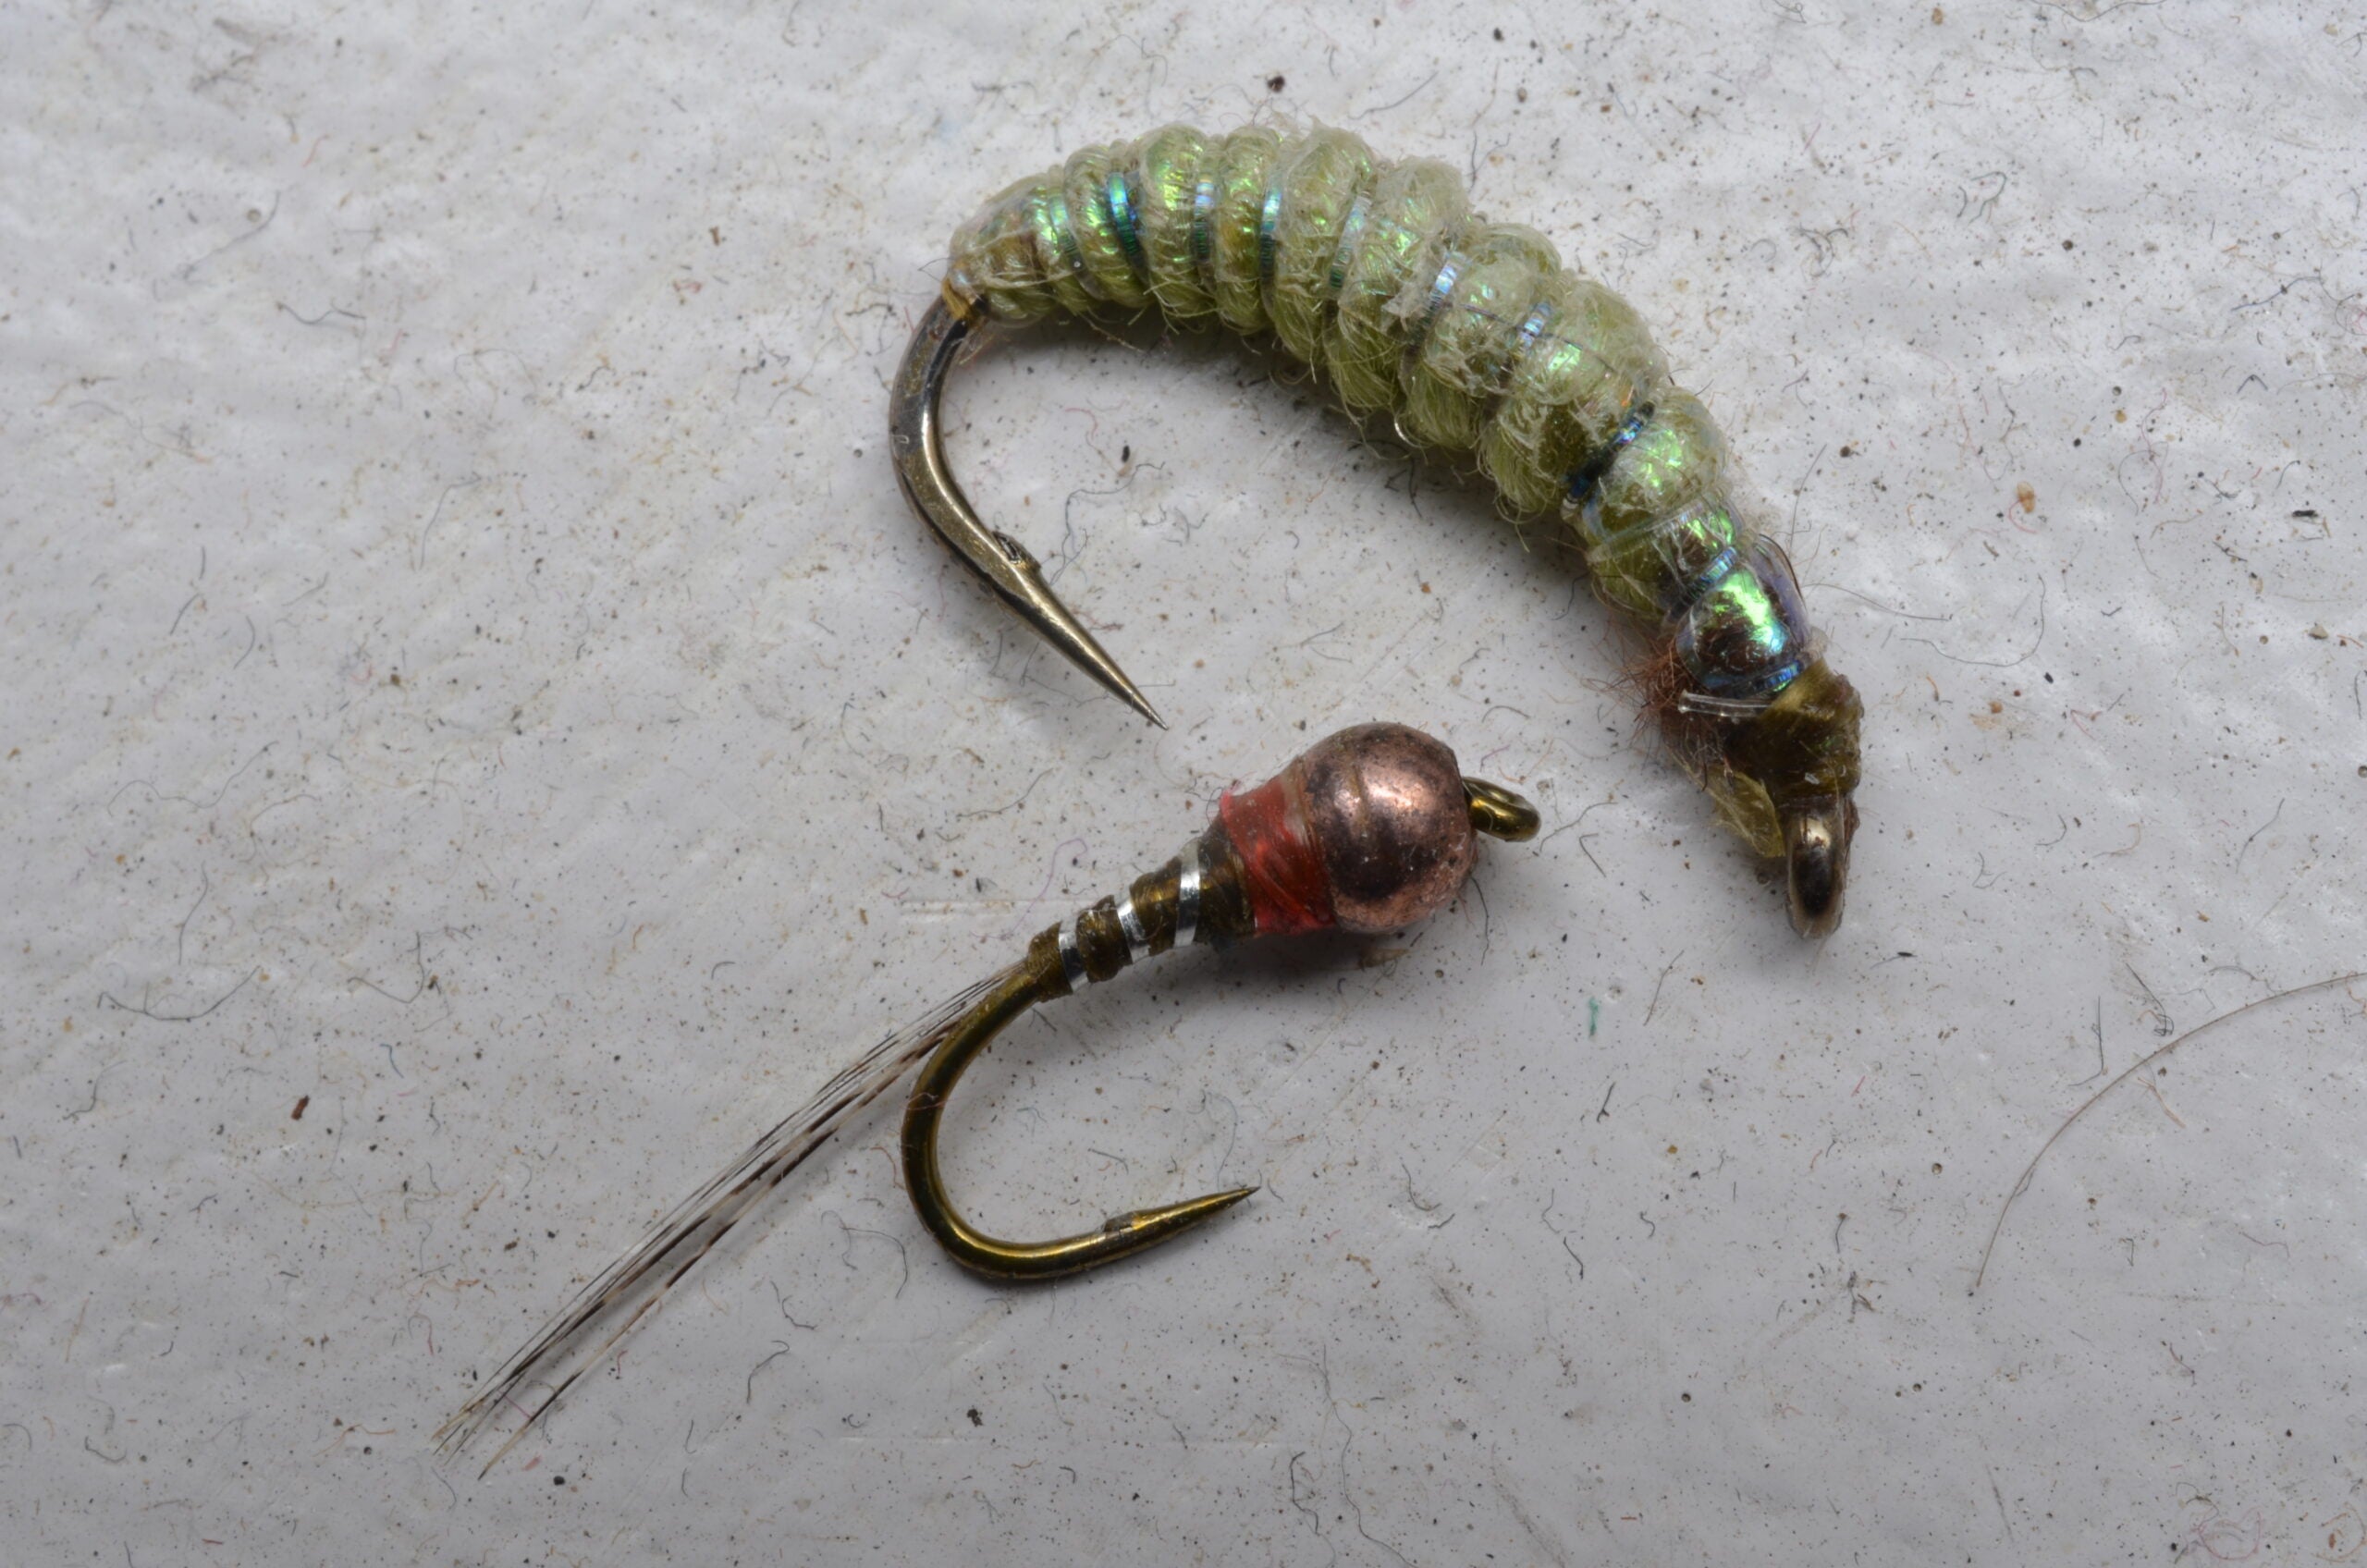 Euro Nymphing: Gear and Tips for Trout Fishing